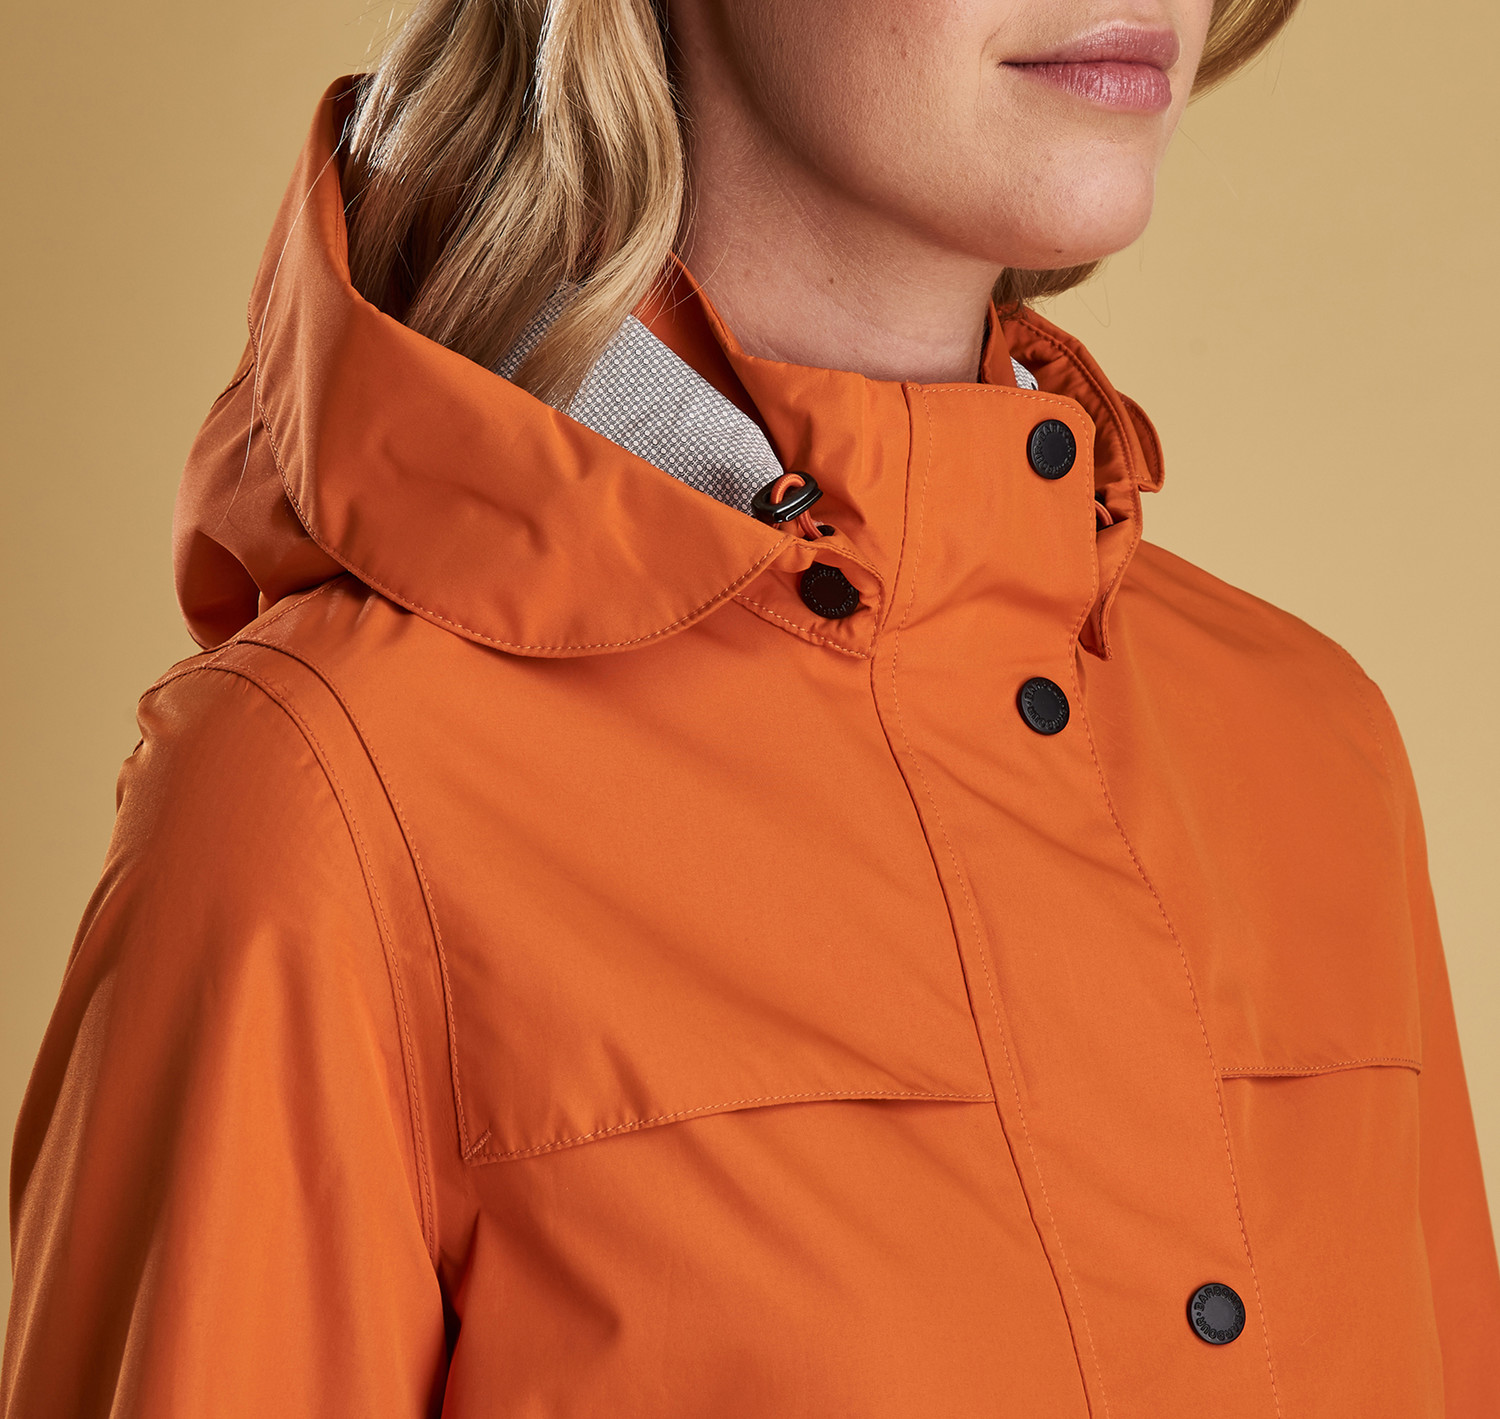 Barbour Drizzle Waterproof Jacket for Her